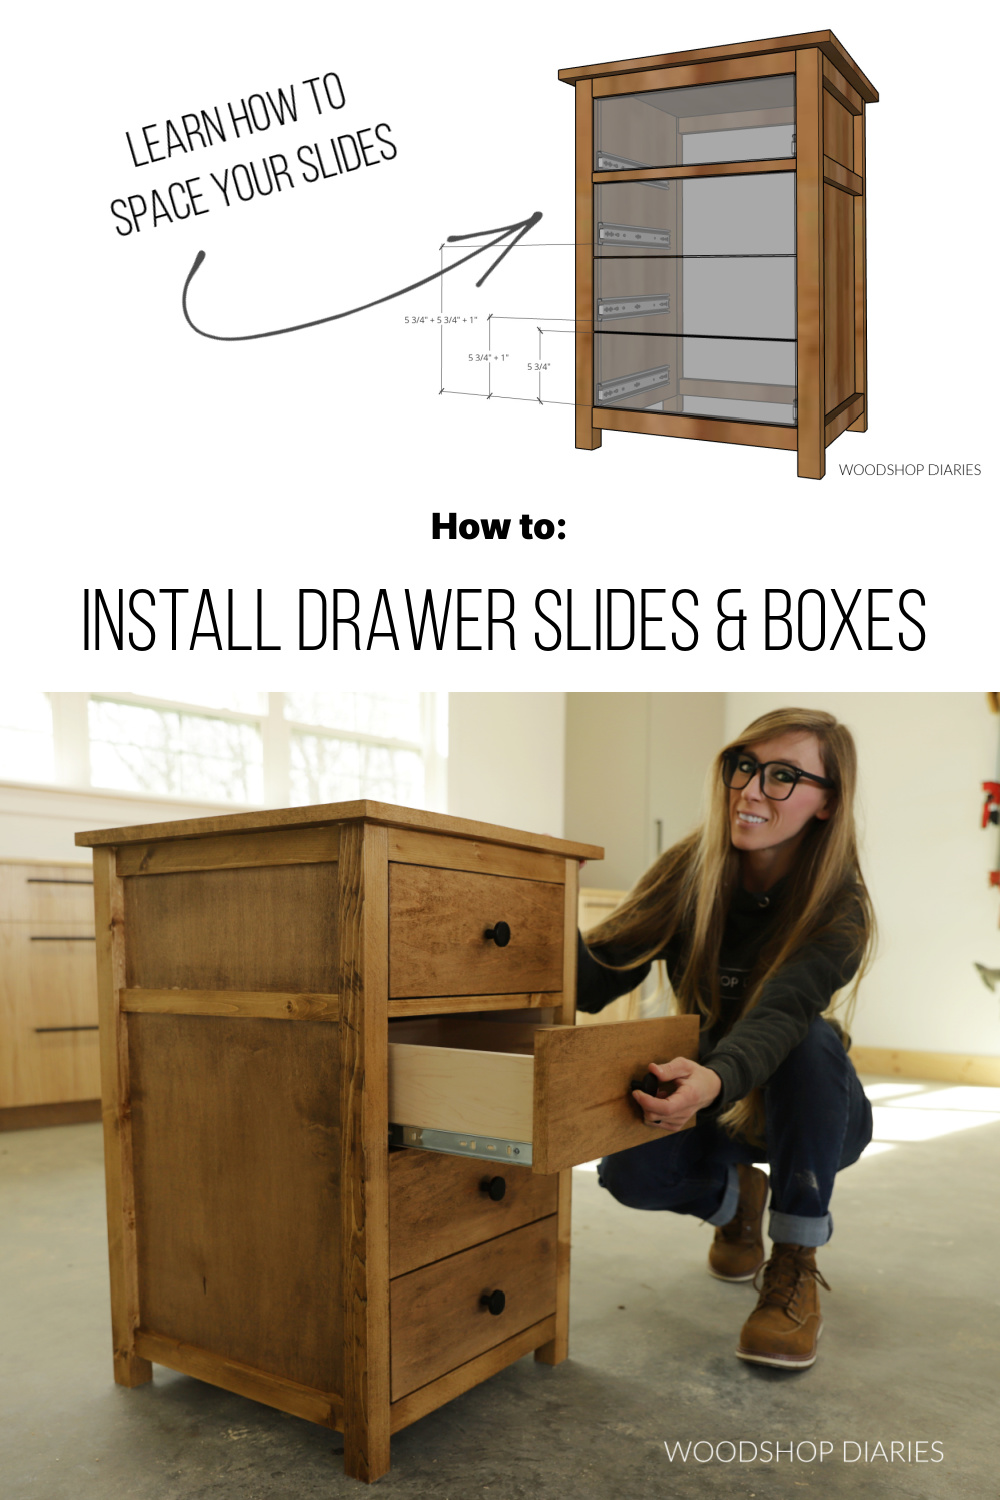 Pinterest collage image showing computer diagram of slide spacing at top and Shara Woodshop Diaries pulling drawer out of end table at bottom with text "how to install drawer slides and boxes"